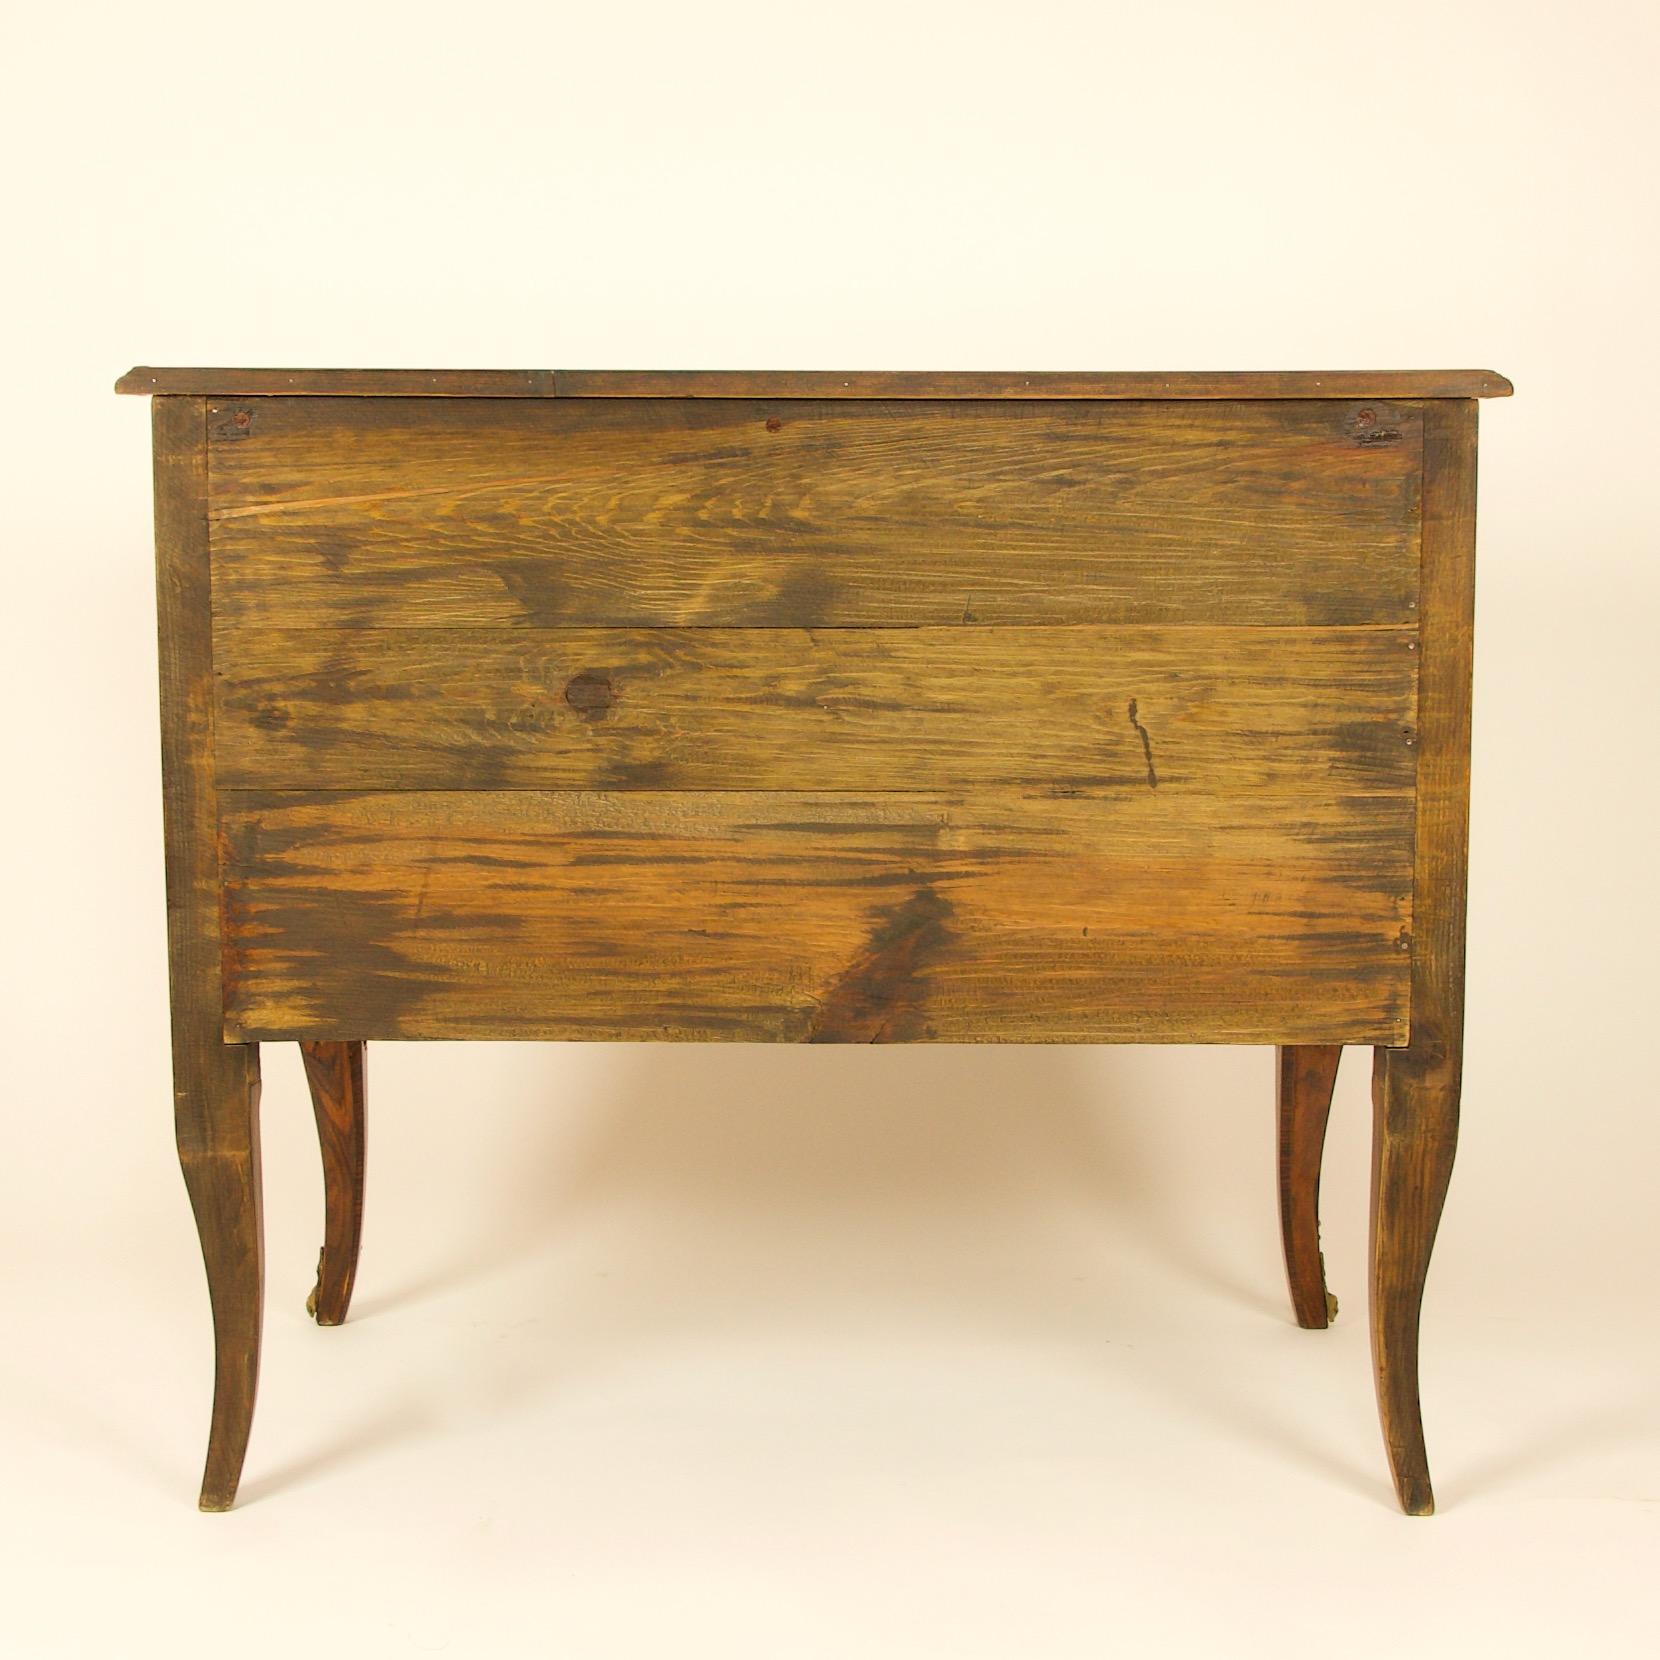 19th Century French Louis XIV Régence Trelliswork Marquetry Commode or Sauteuse For Sale 2